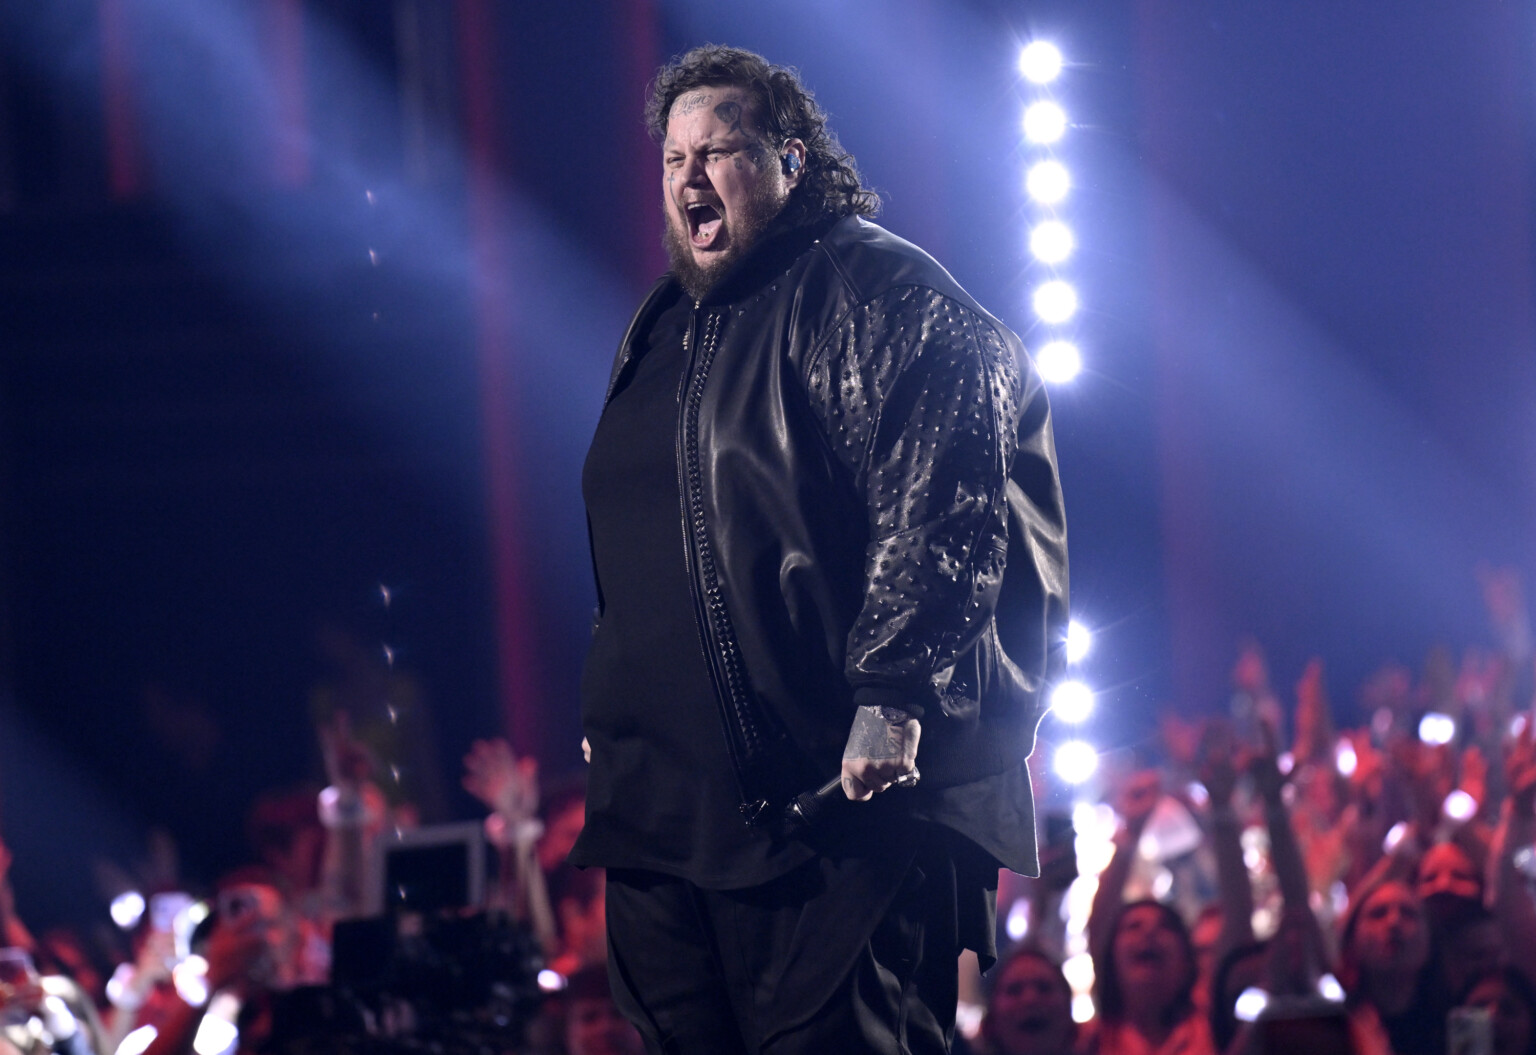 'Son of a Sinner' Jelly Roll reigns at CMT Music Awards show WBBJ TV